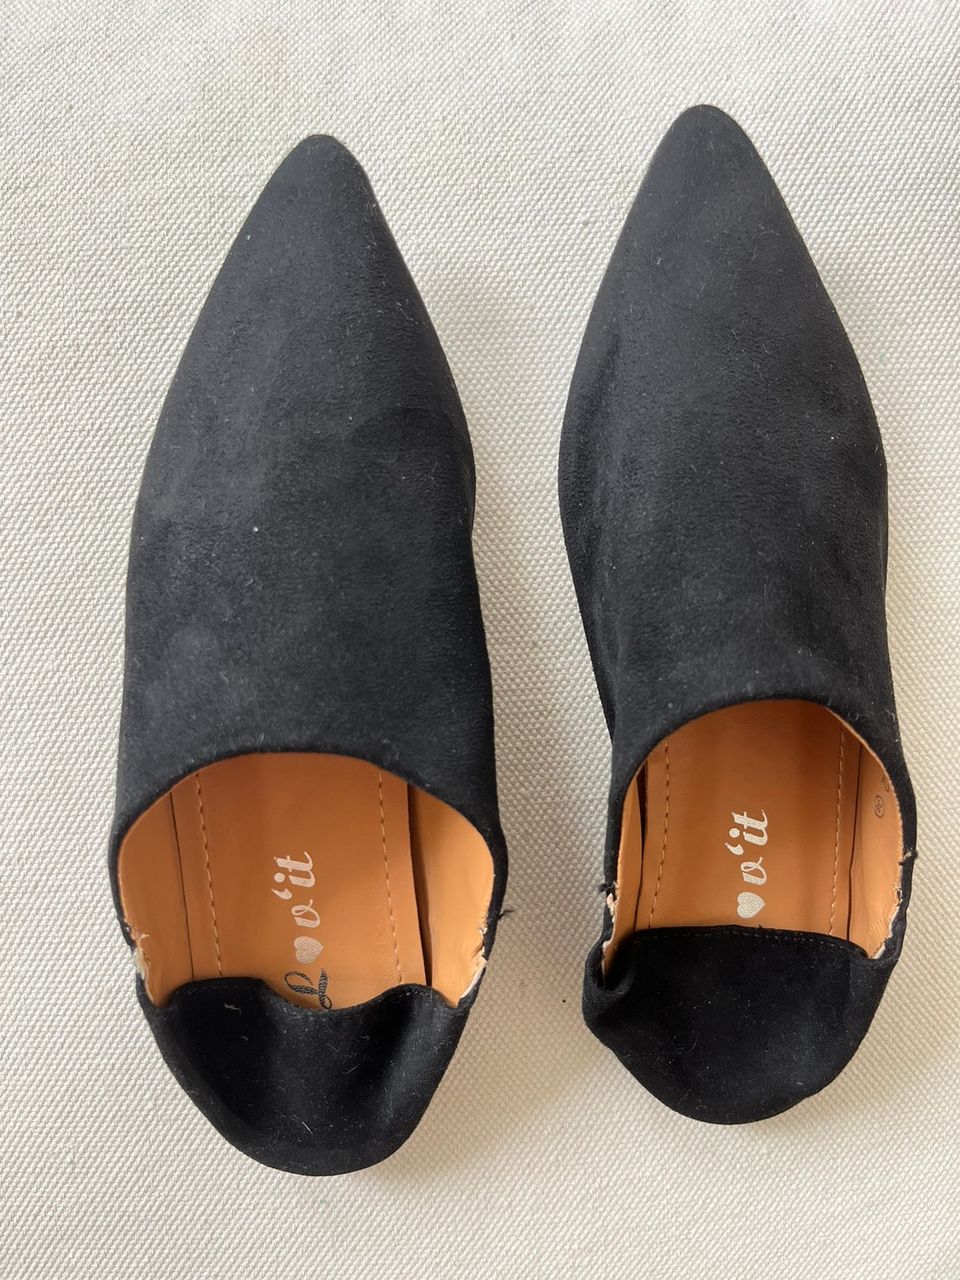 Foldable loafers/flats